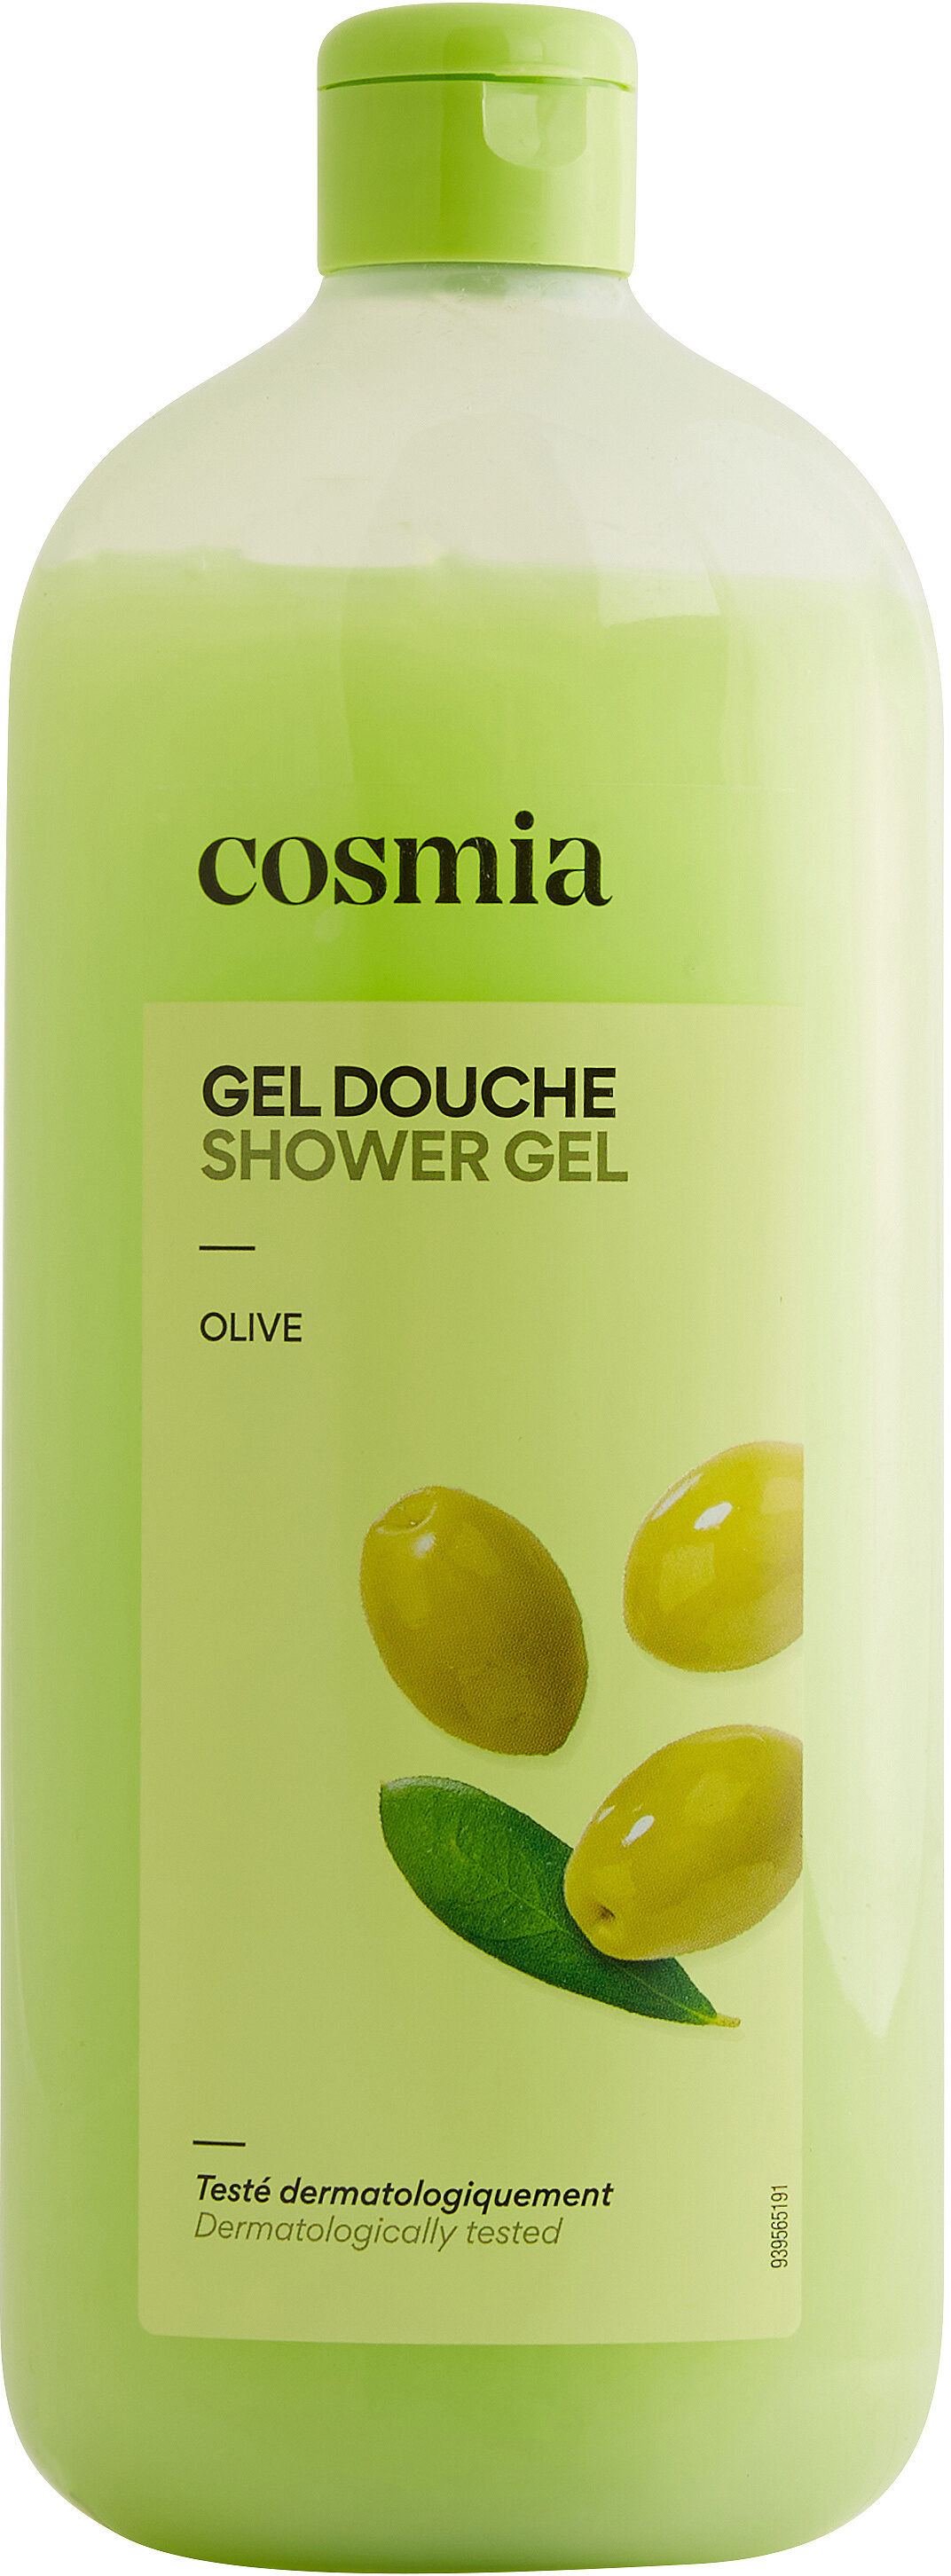 Cosmia gel douche olive 750 ml - Tuote - fr